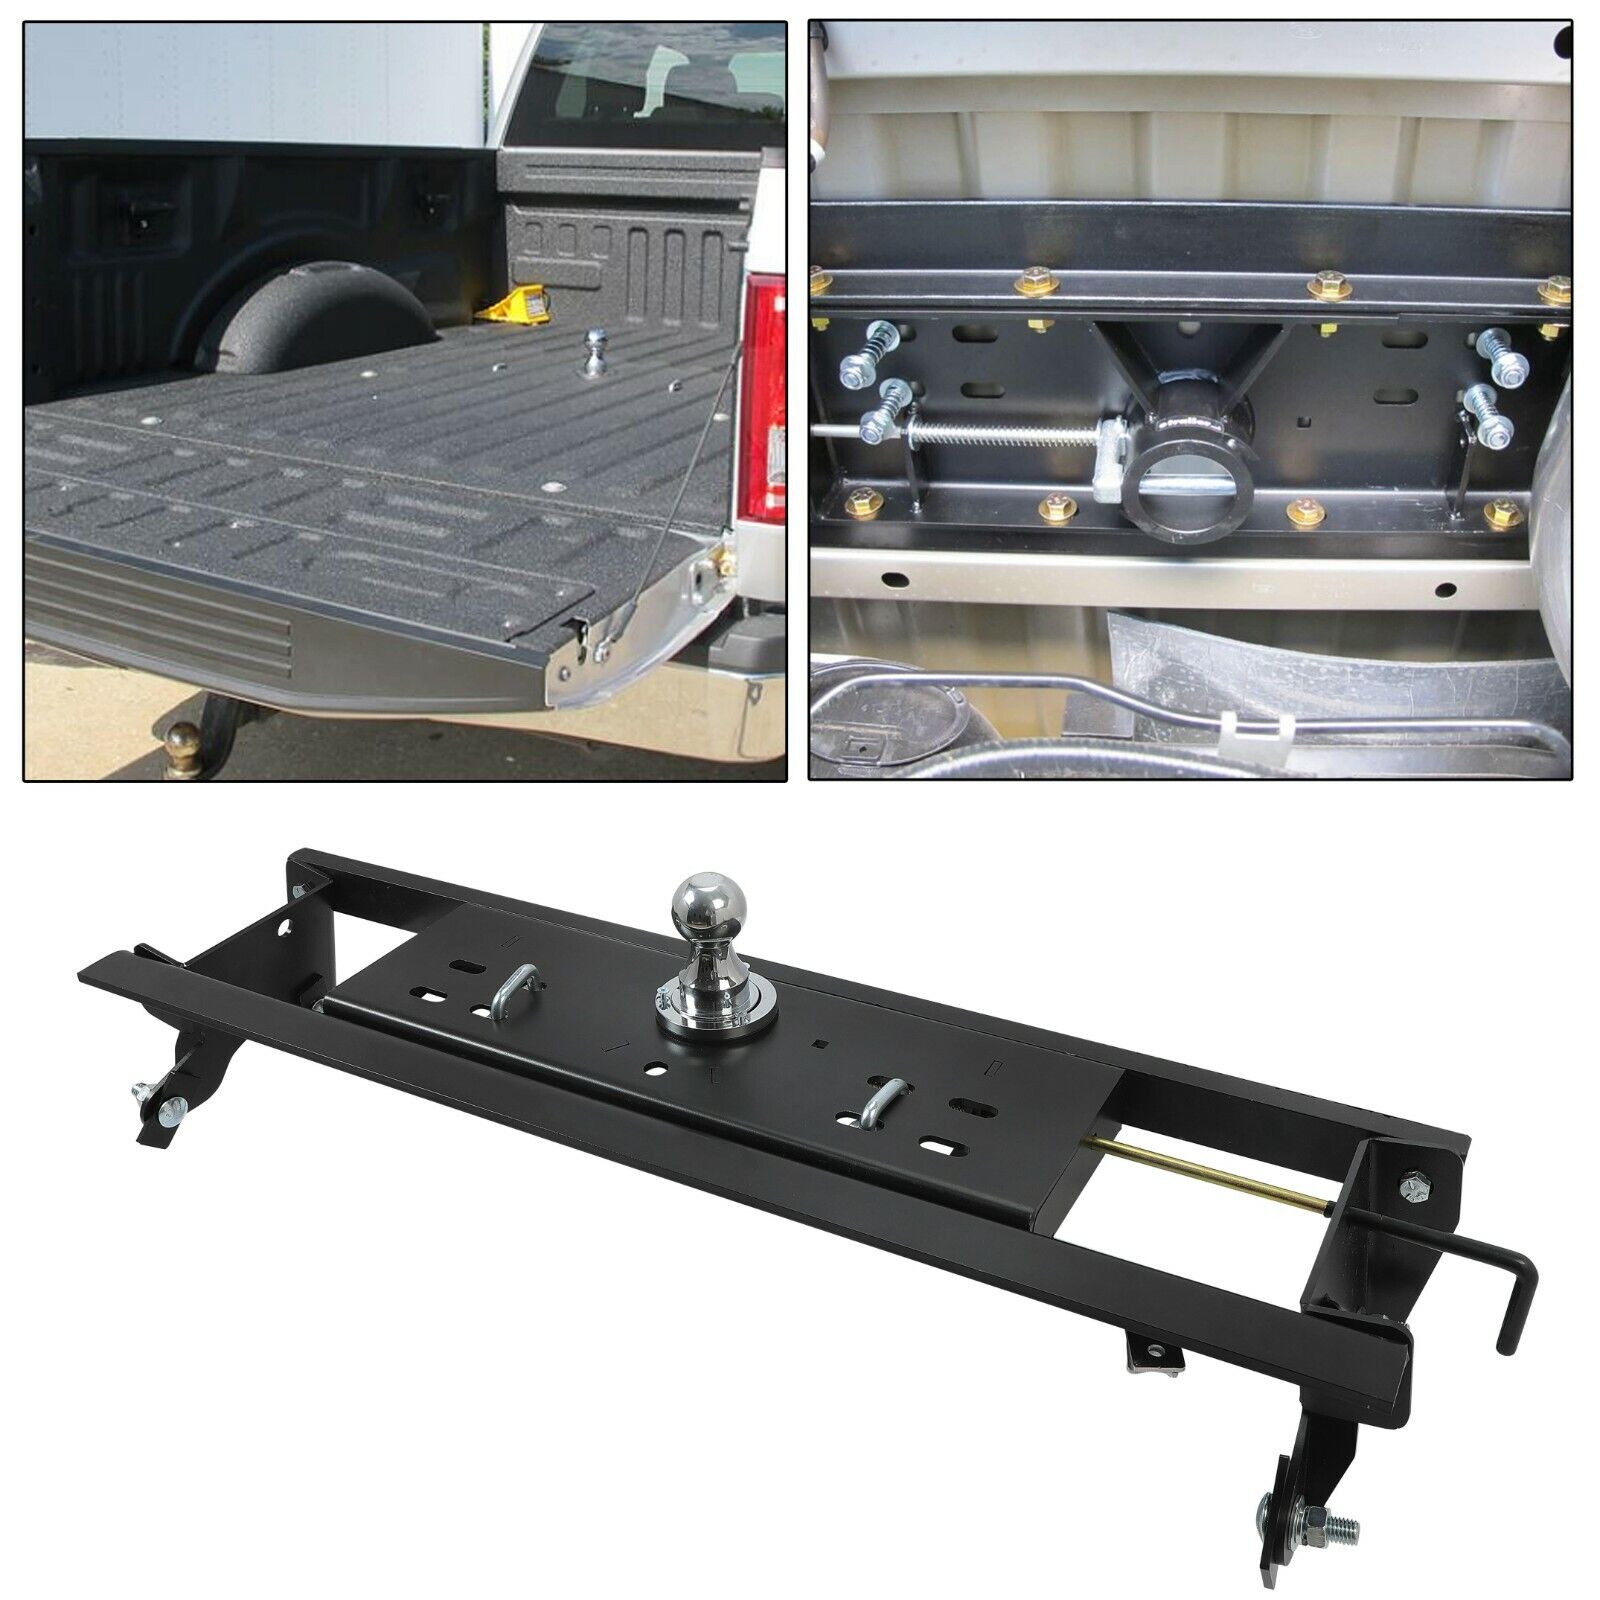 Fit 15-20 Ford F150 30,000 lbs Double Lock Gooseneck Trailer Hitch Powder Coated